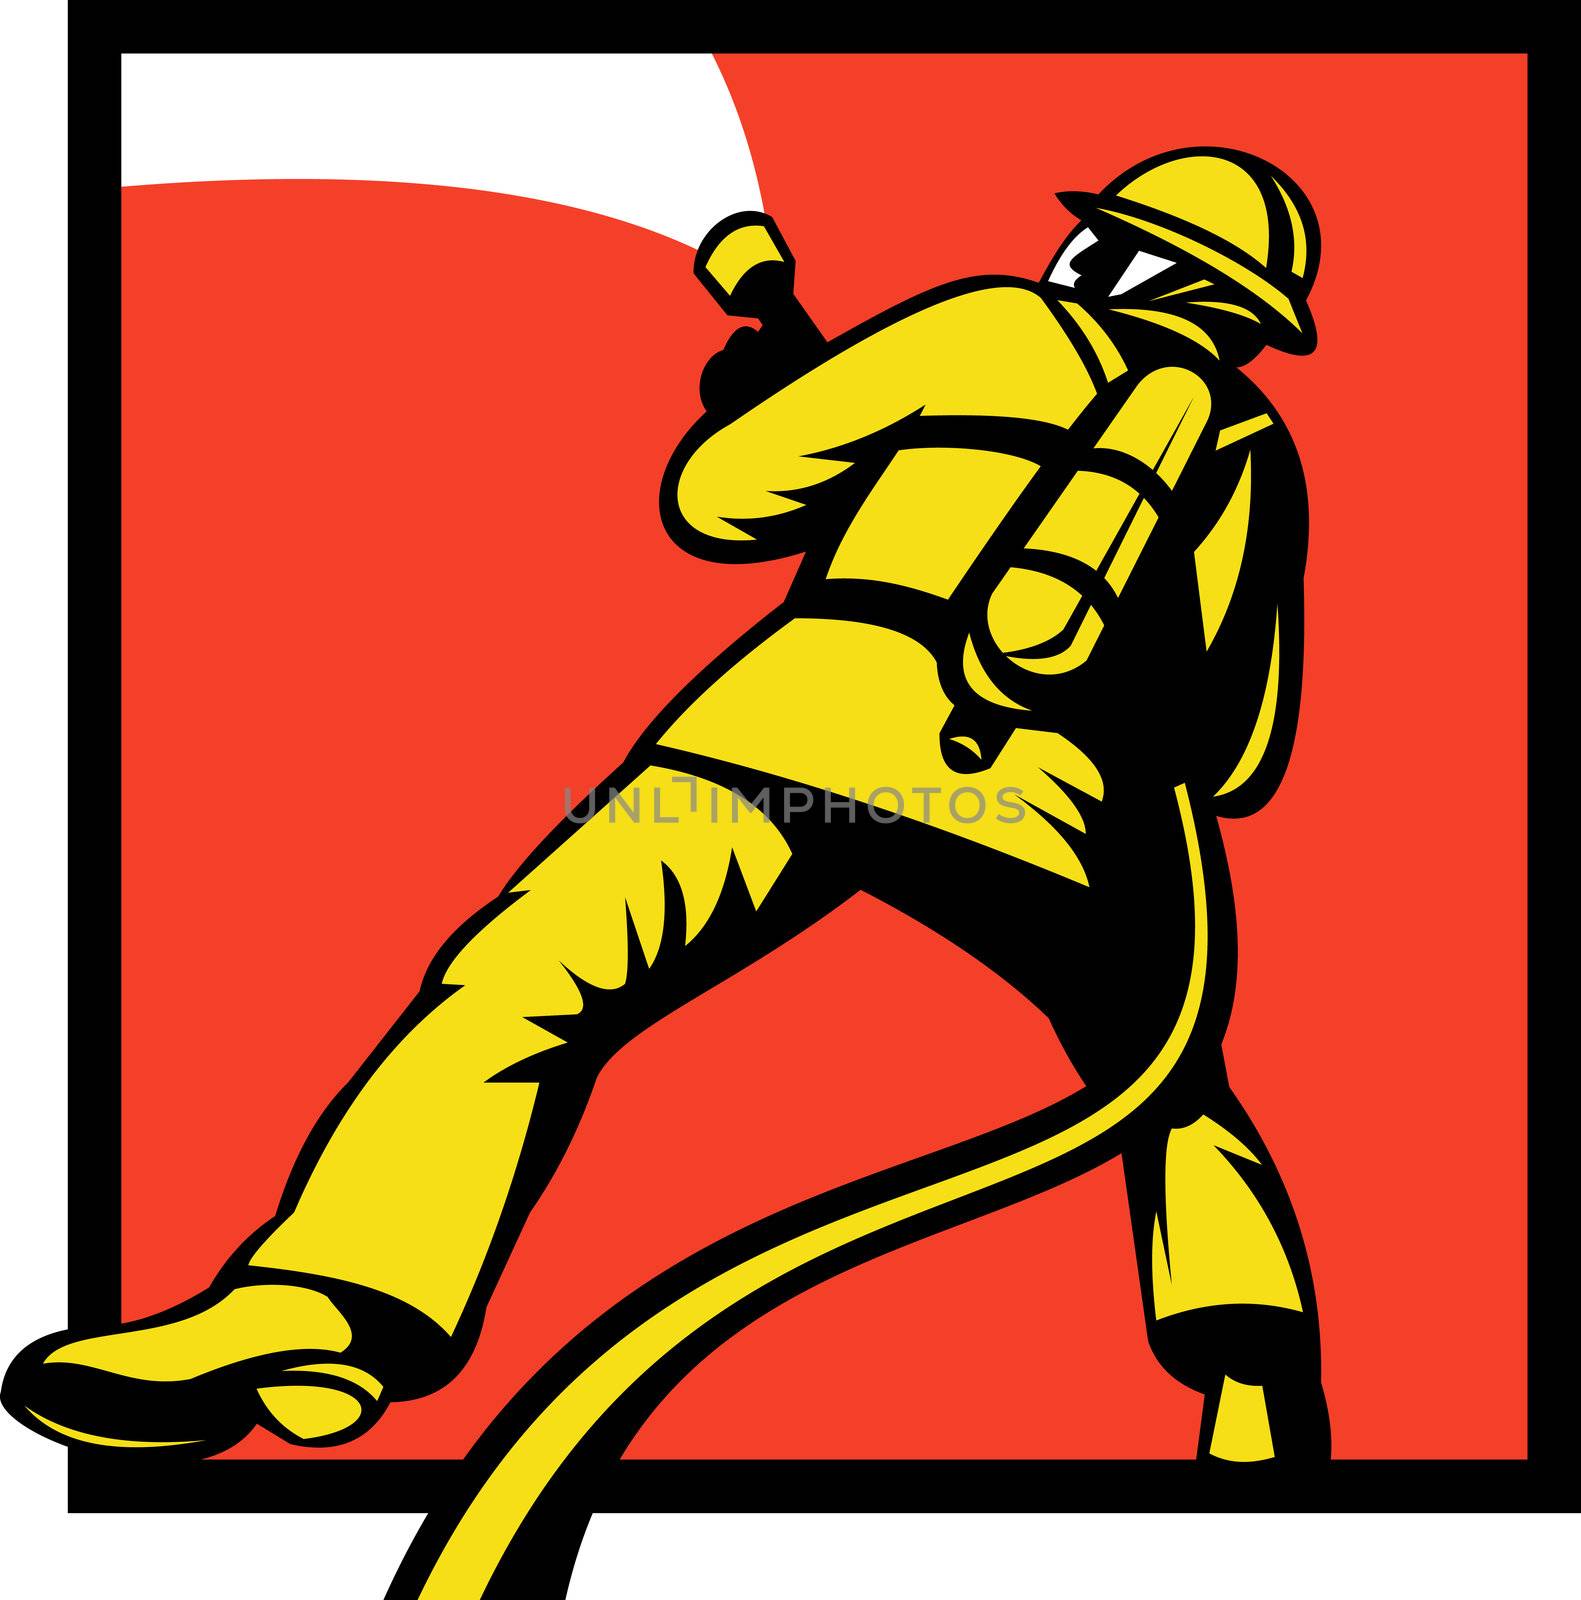  illustration of a Firefighter or fireman aiming a fire hose viewed from rear in retro style